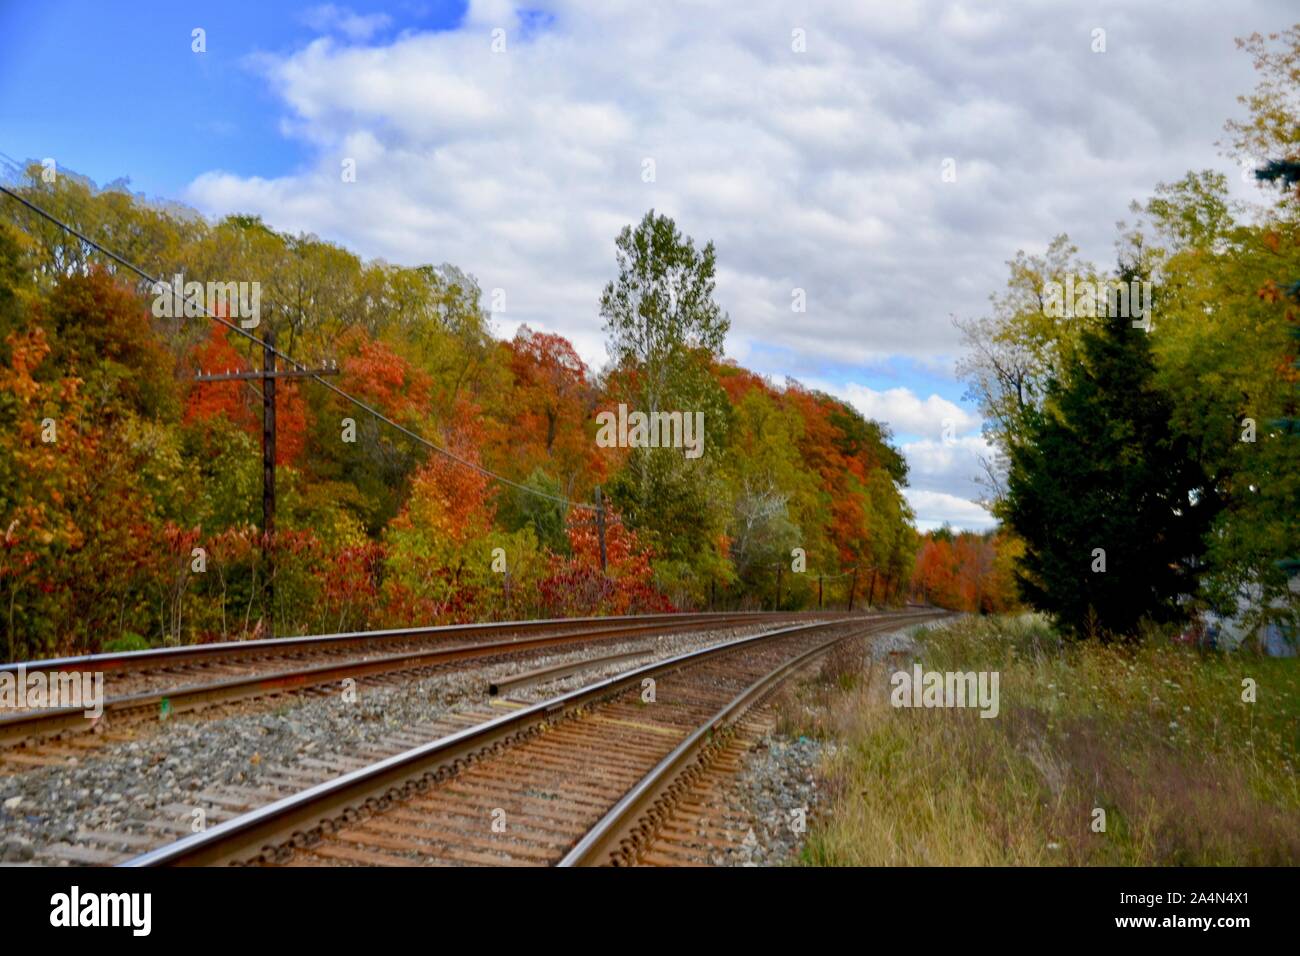 Railway tracks with fall trees in vibrant colours Stock Photo